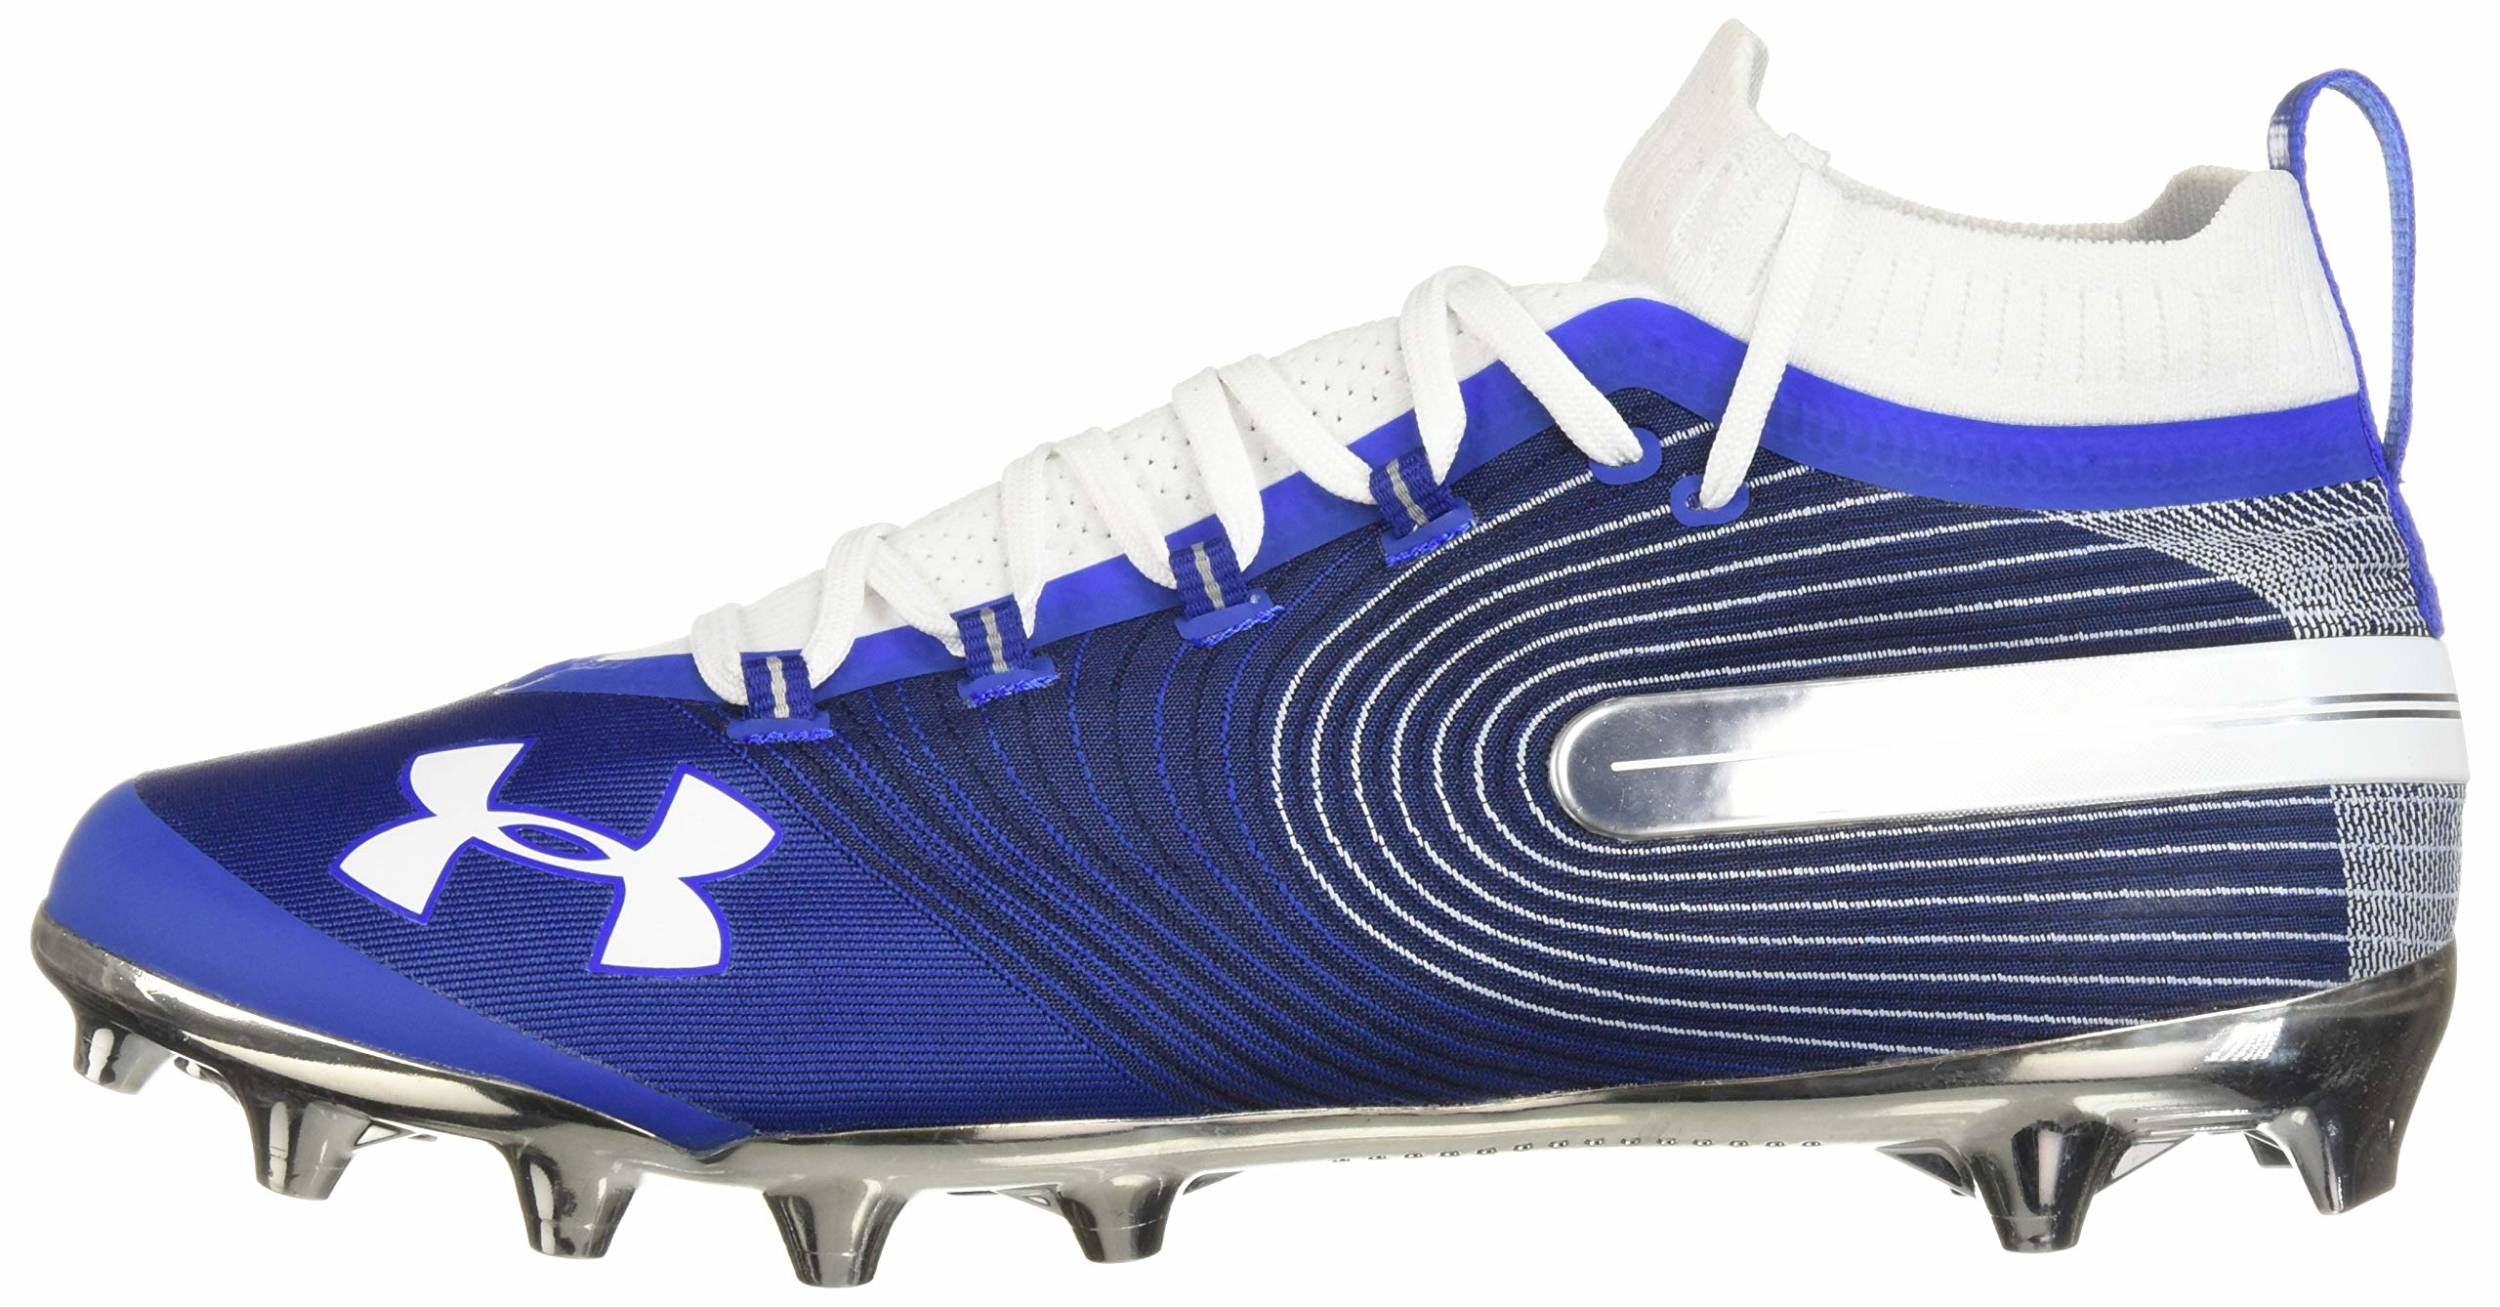 blue and black football cleats